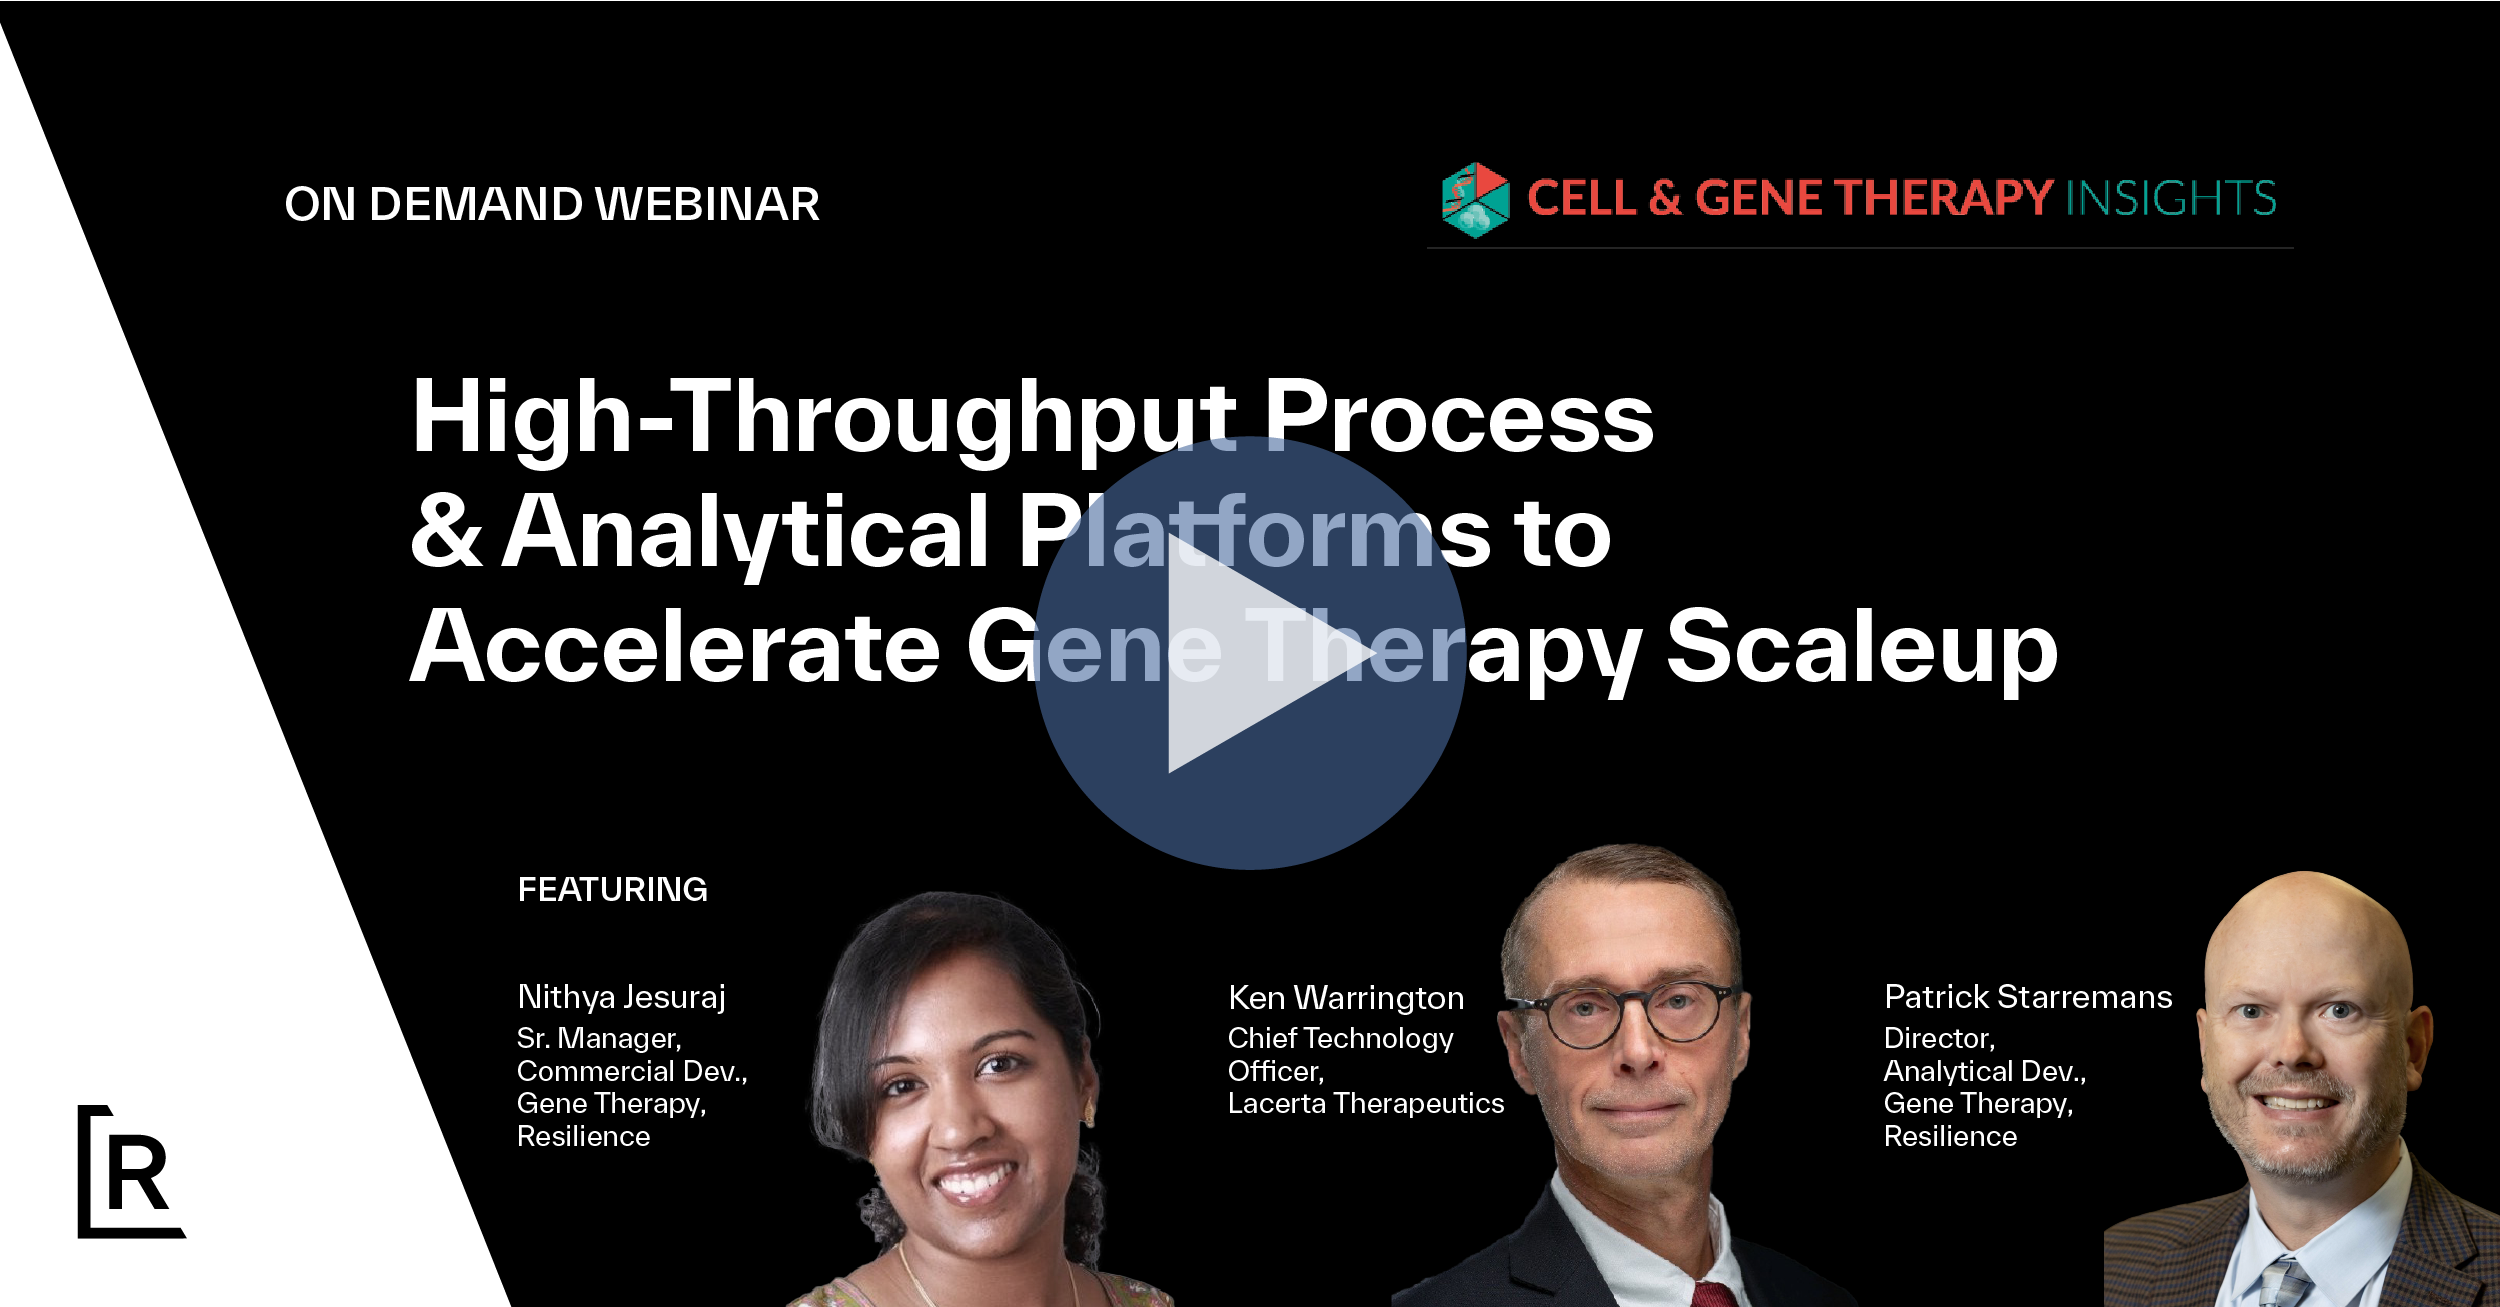 On-Demand Webinar: High-Throughput Process & Analytical Platforms to Accelerate Gene Therapy Scale-Up - featured image